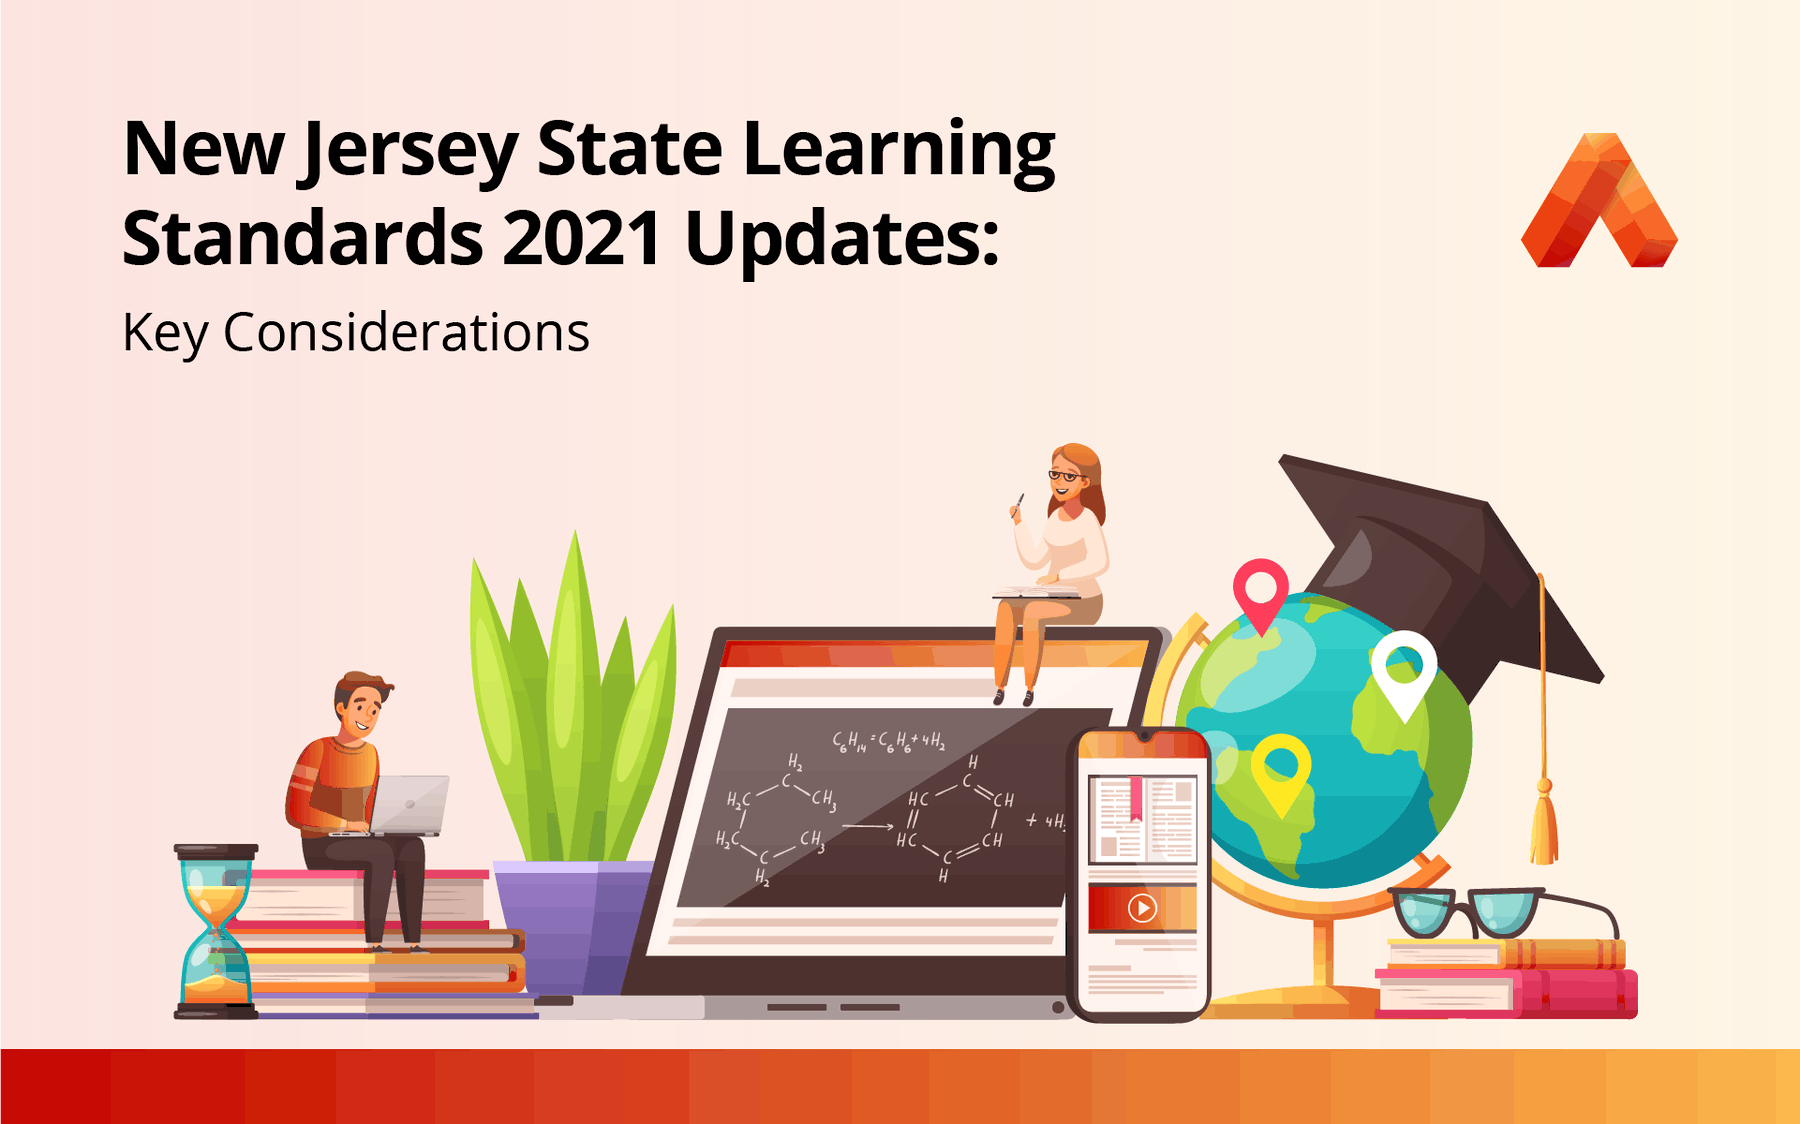 New Jersey State Learning Standards 2021 Updates 02@2x 1